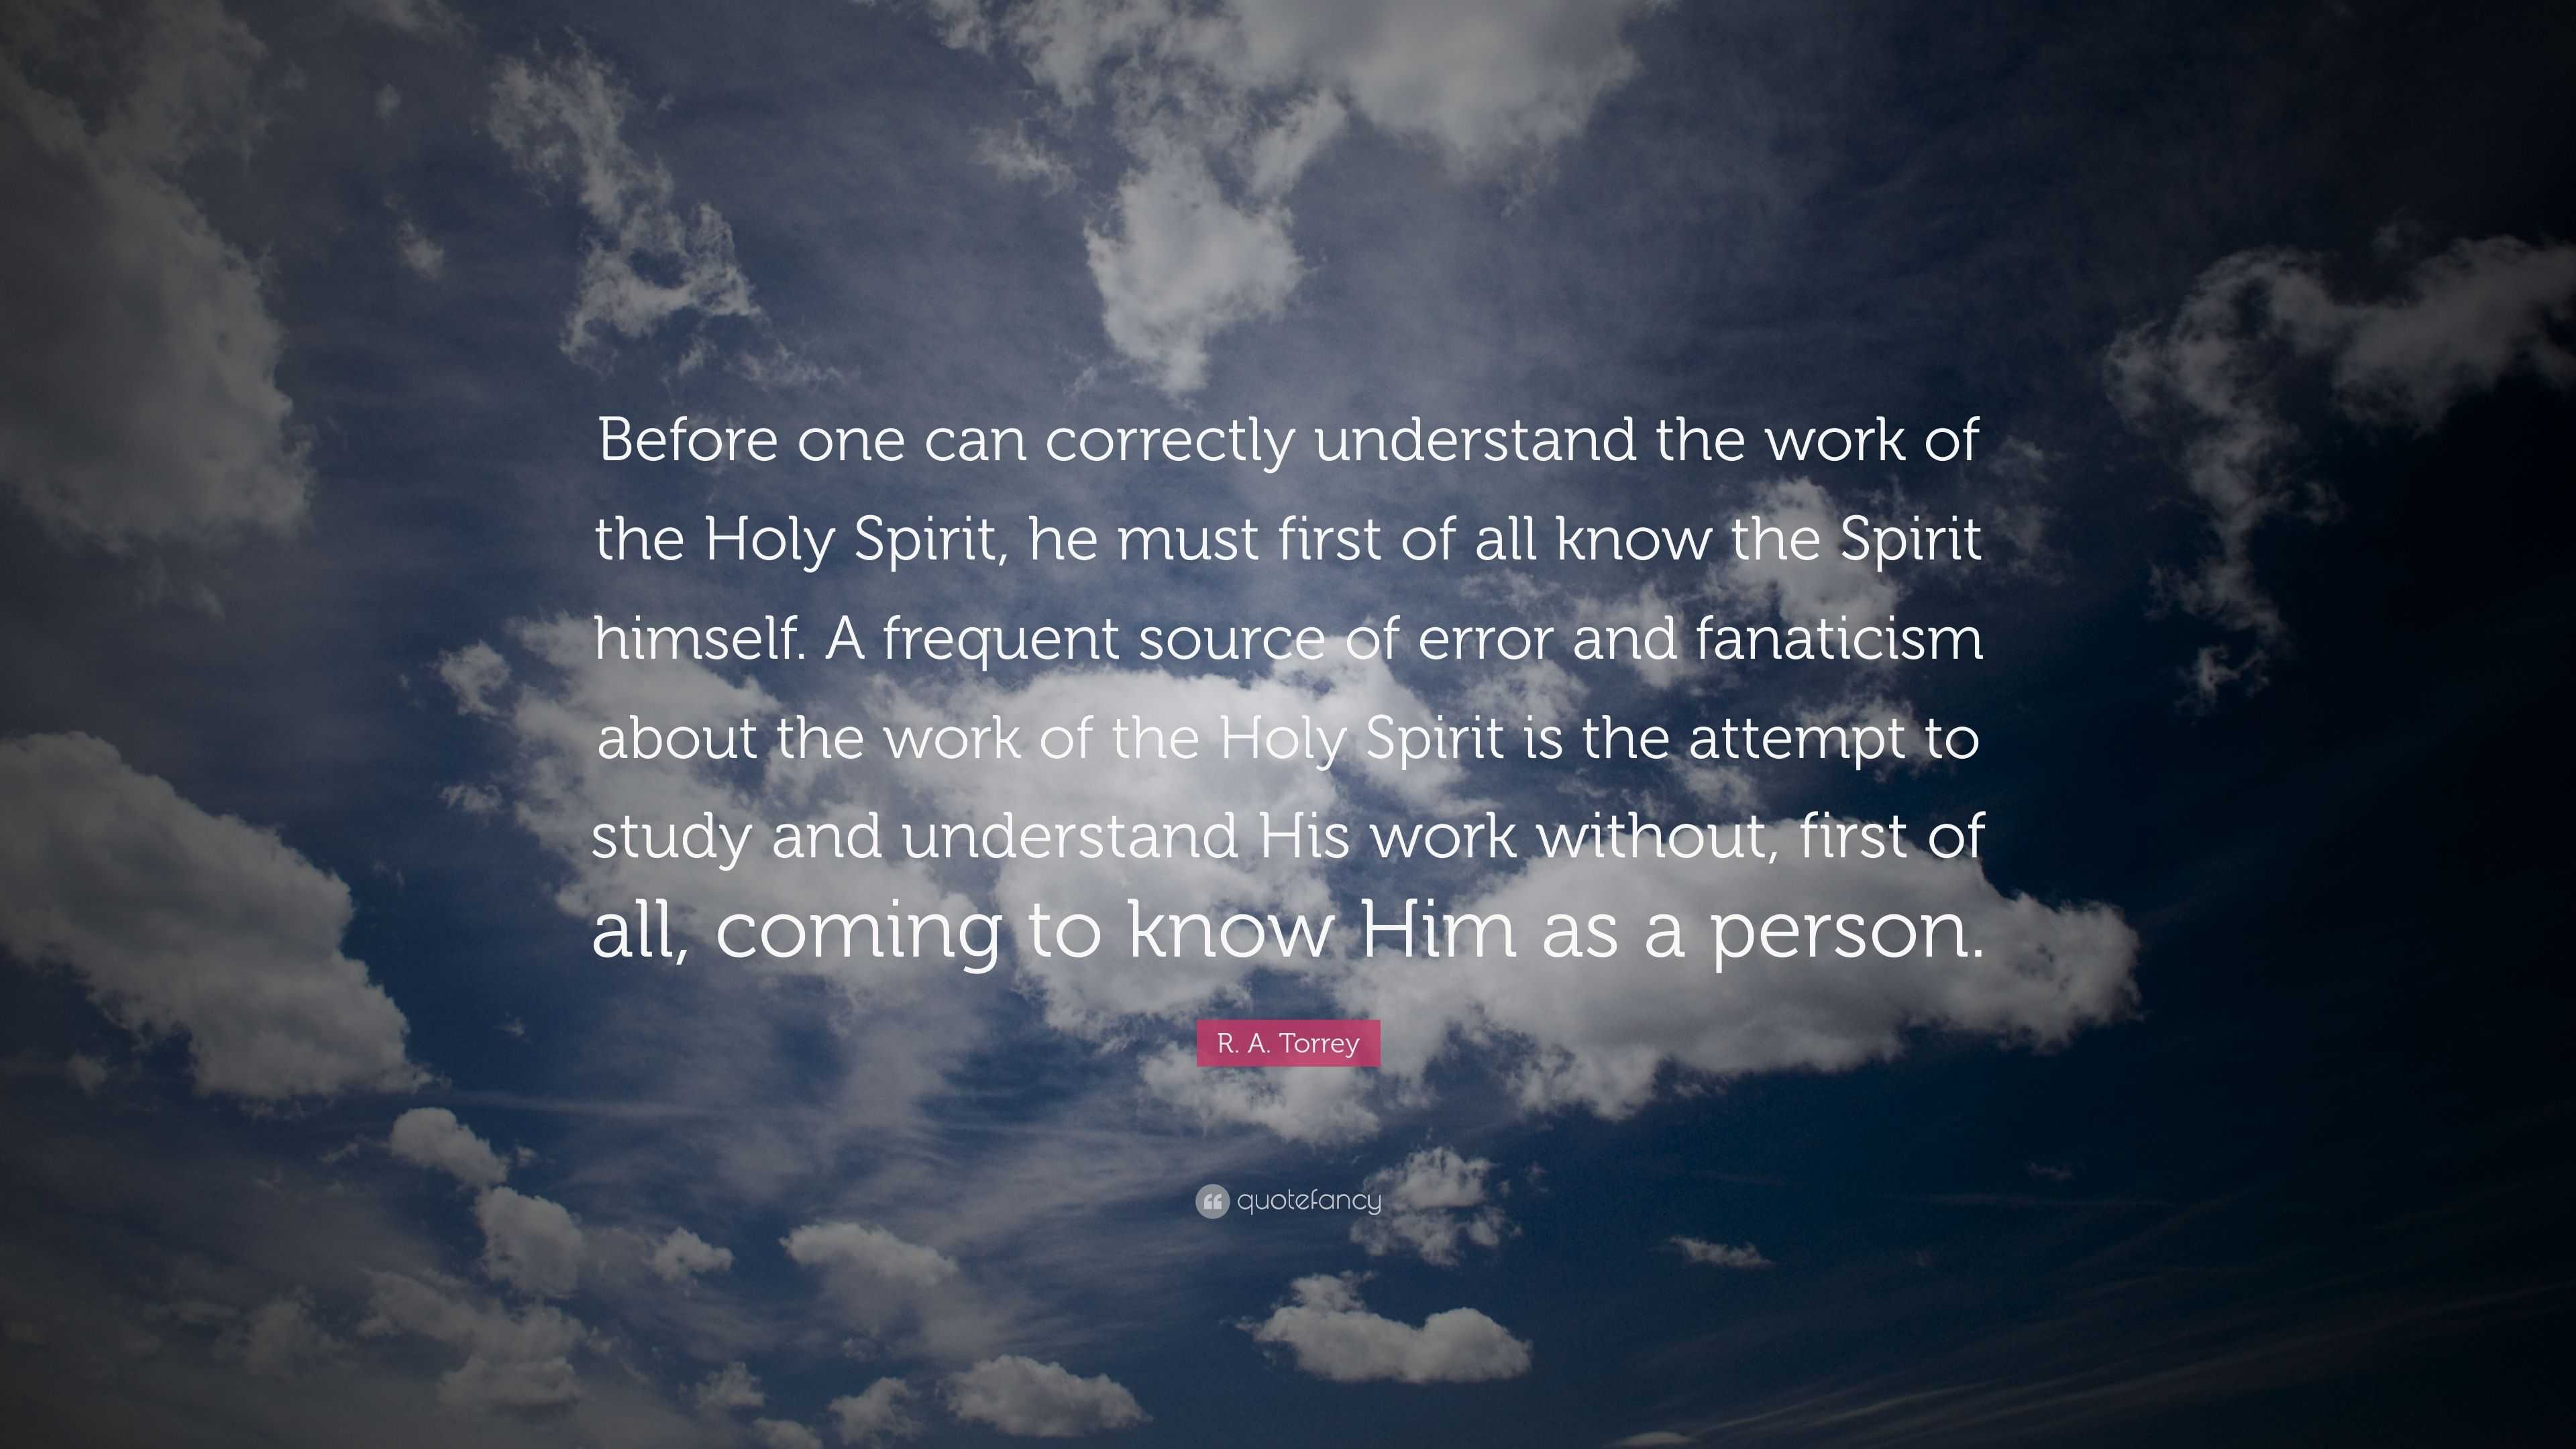 How to Know and Understand the Holy Spirit